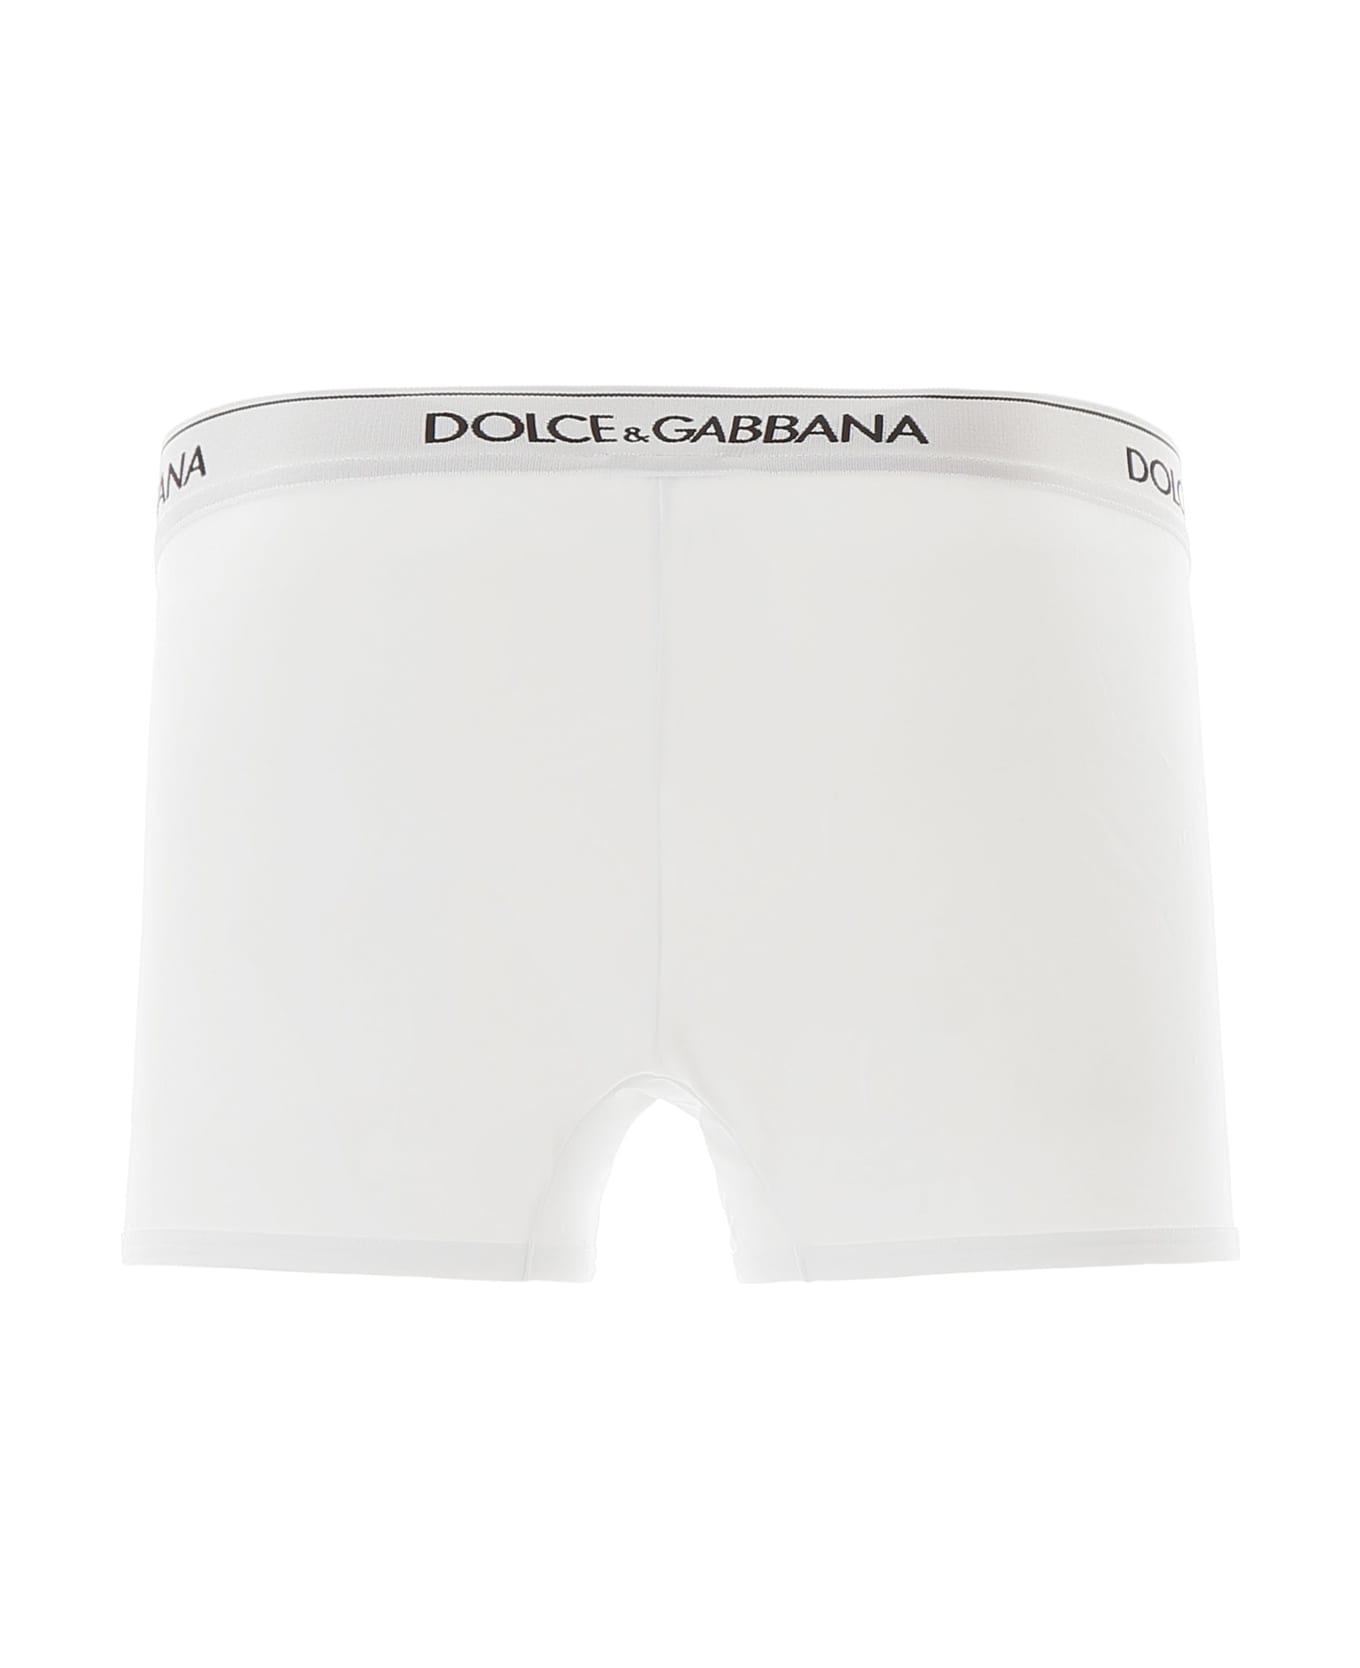 Dolce & Gabbana Pack Of Two Boxers - White ショーツ